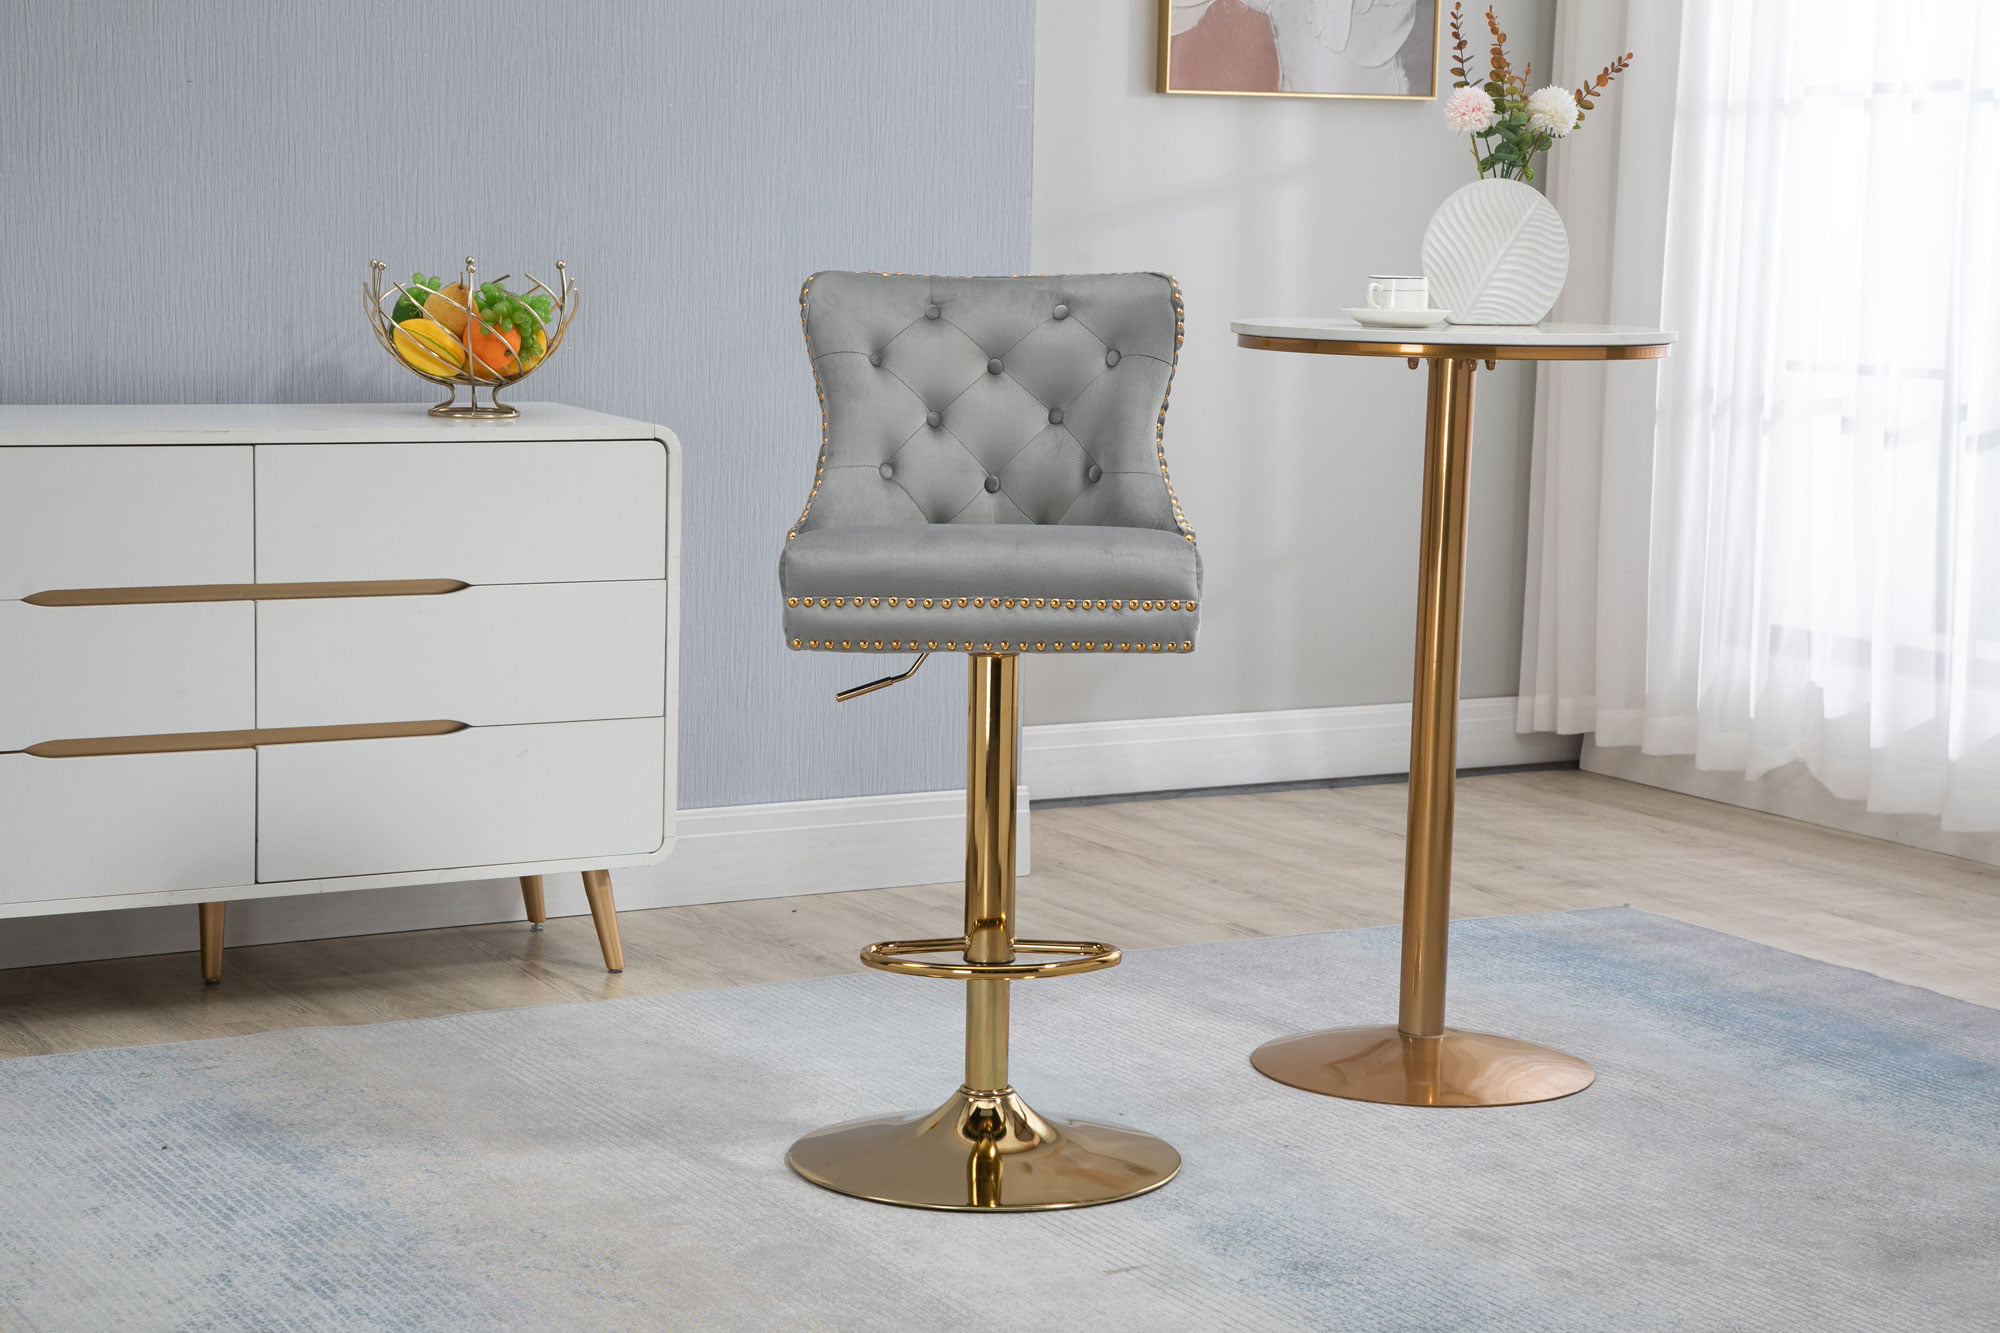 COOLMORE Bar Stools with Back and Footrest Counter Height Bar Chairs ...